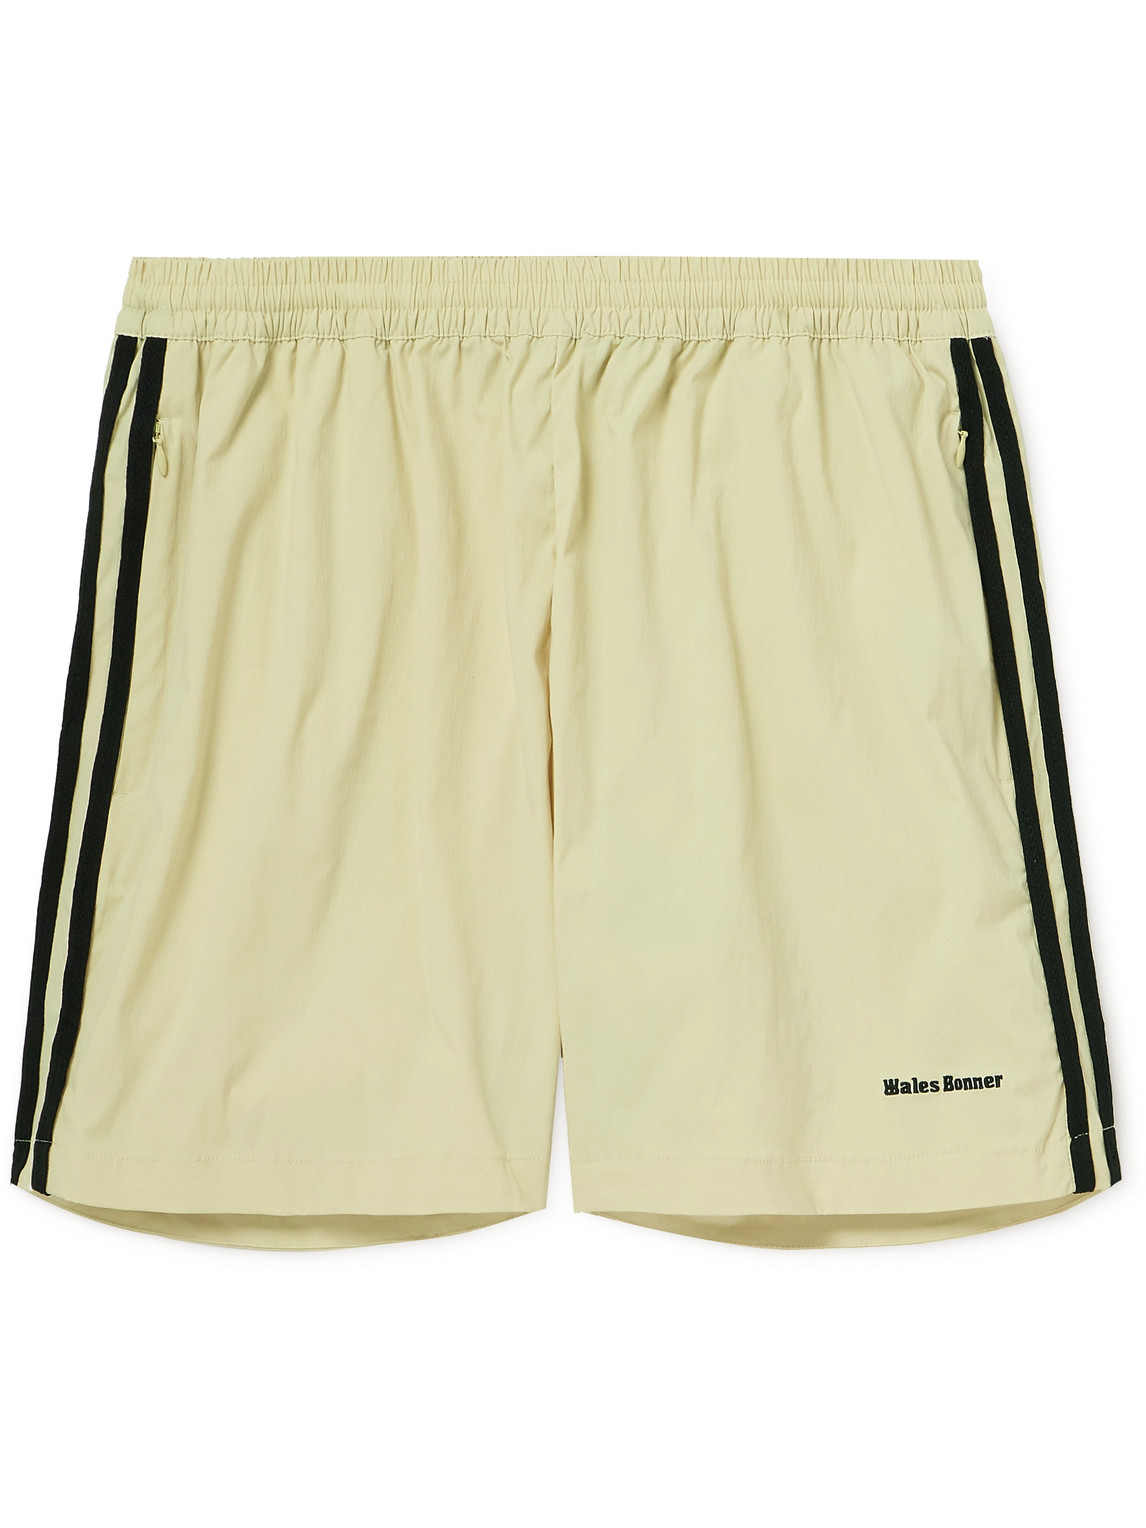 ADIDAS ORIGINALS WALES BONNER WIDE-LEG CROCHET-TRIMMED STRETCH RECYCLED-SHELL SHORTS